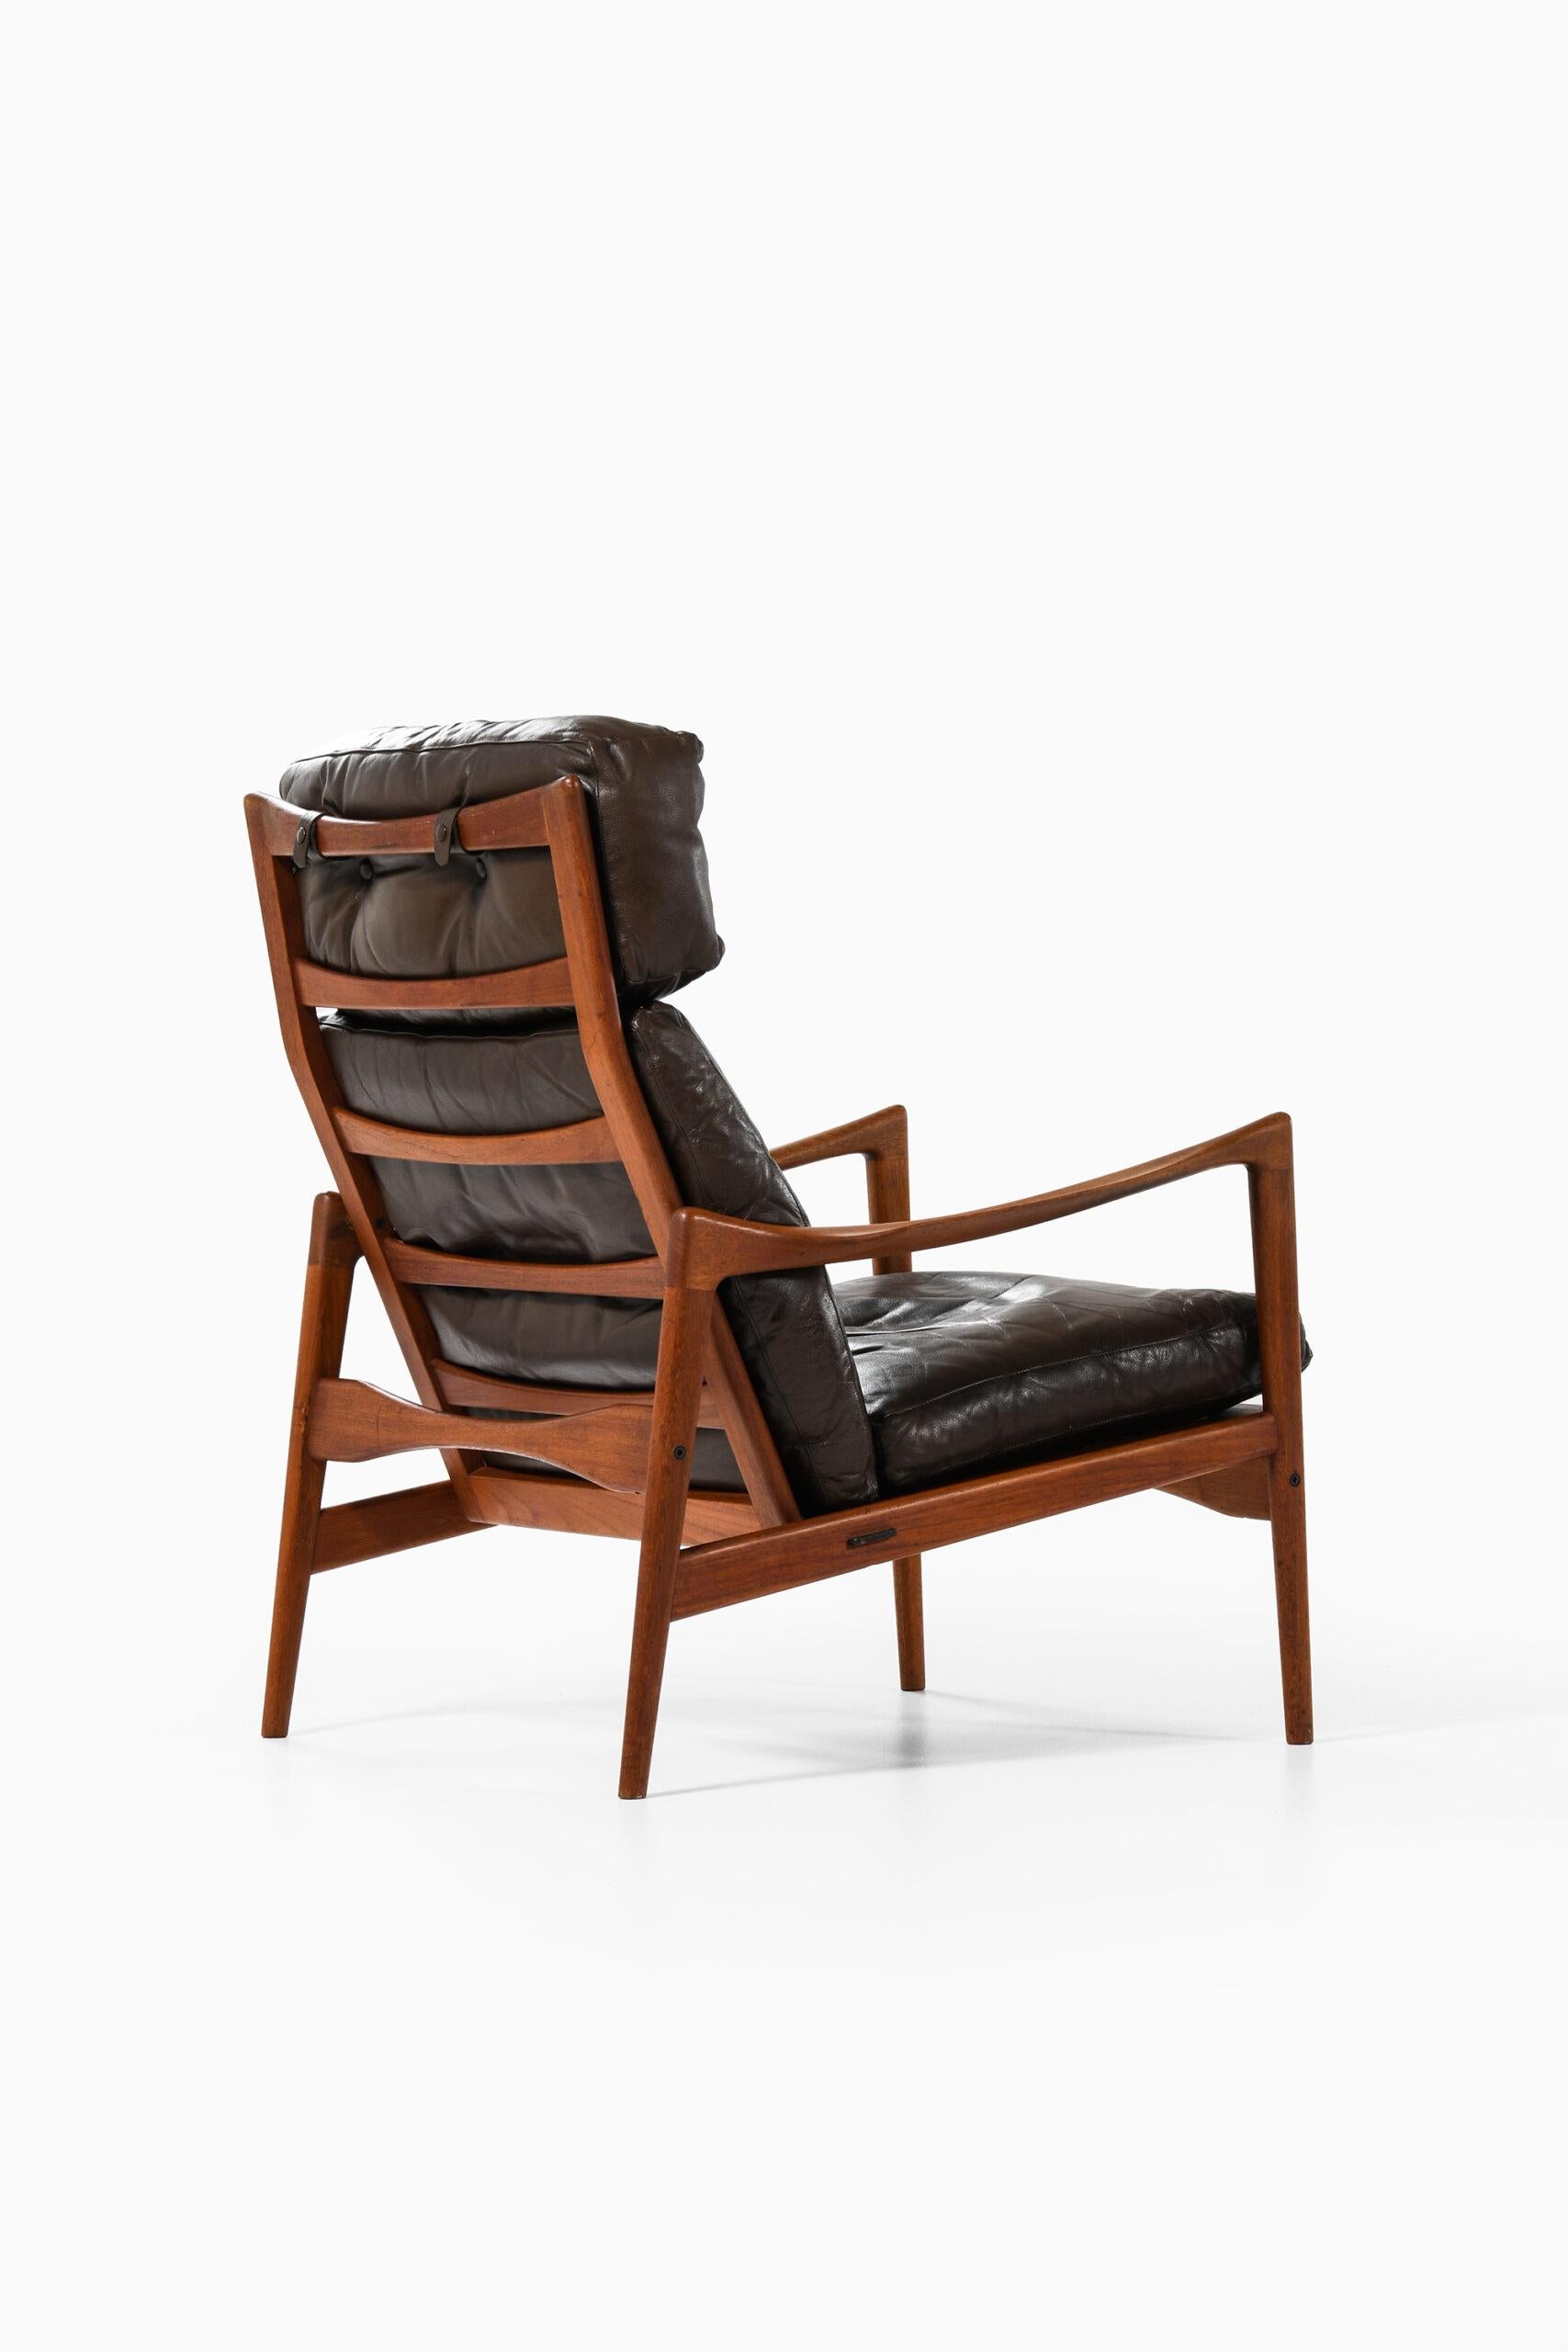 Leather Ib Kofod-Larsen Easy Chair Model Örenäs Produced by OPE in Sweden